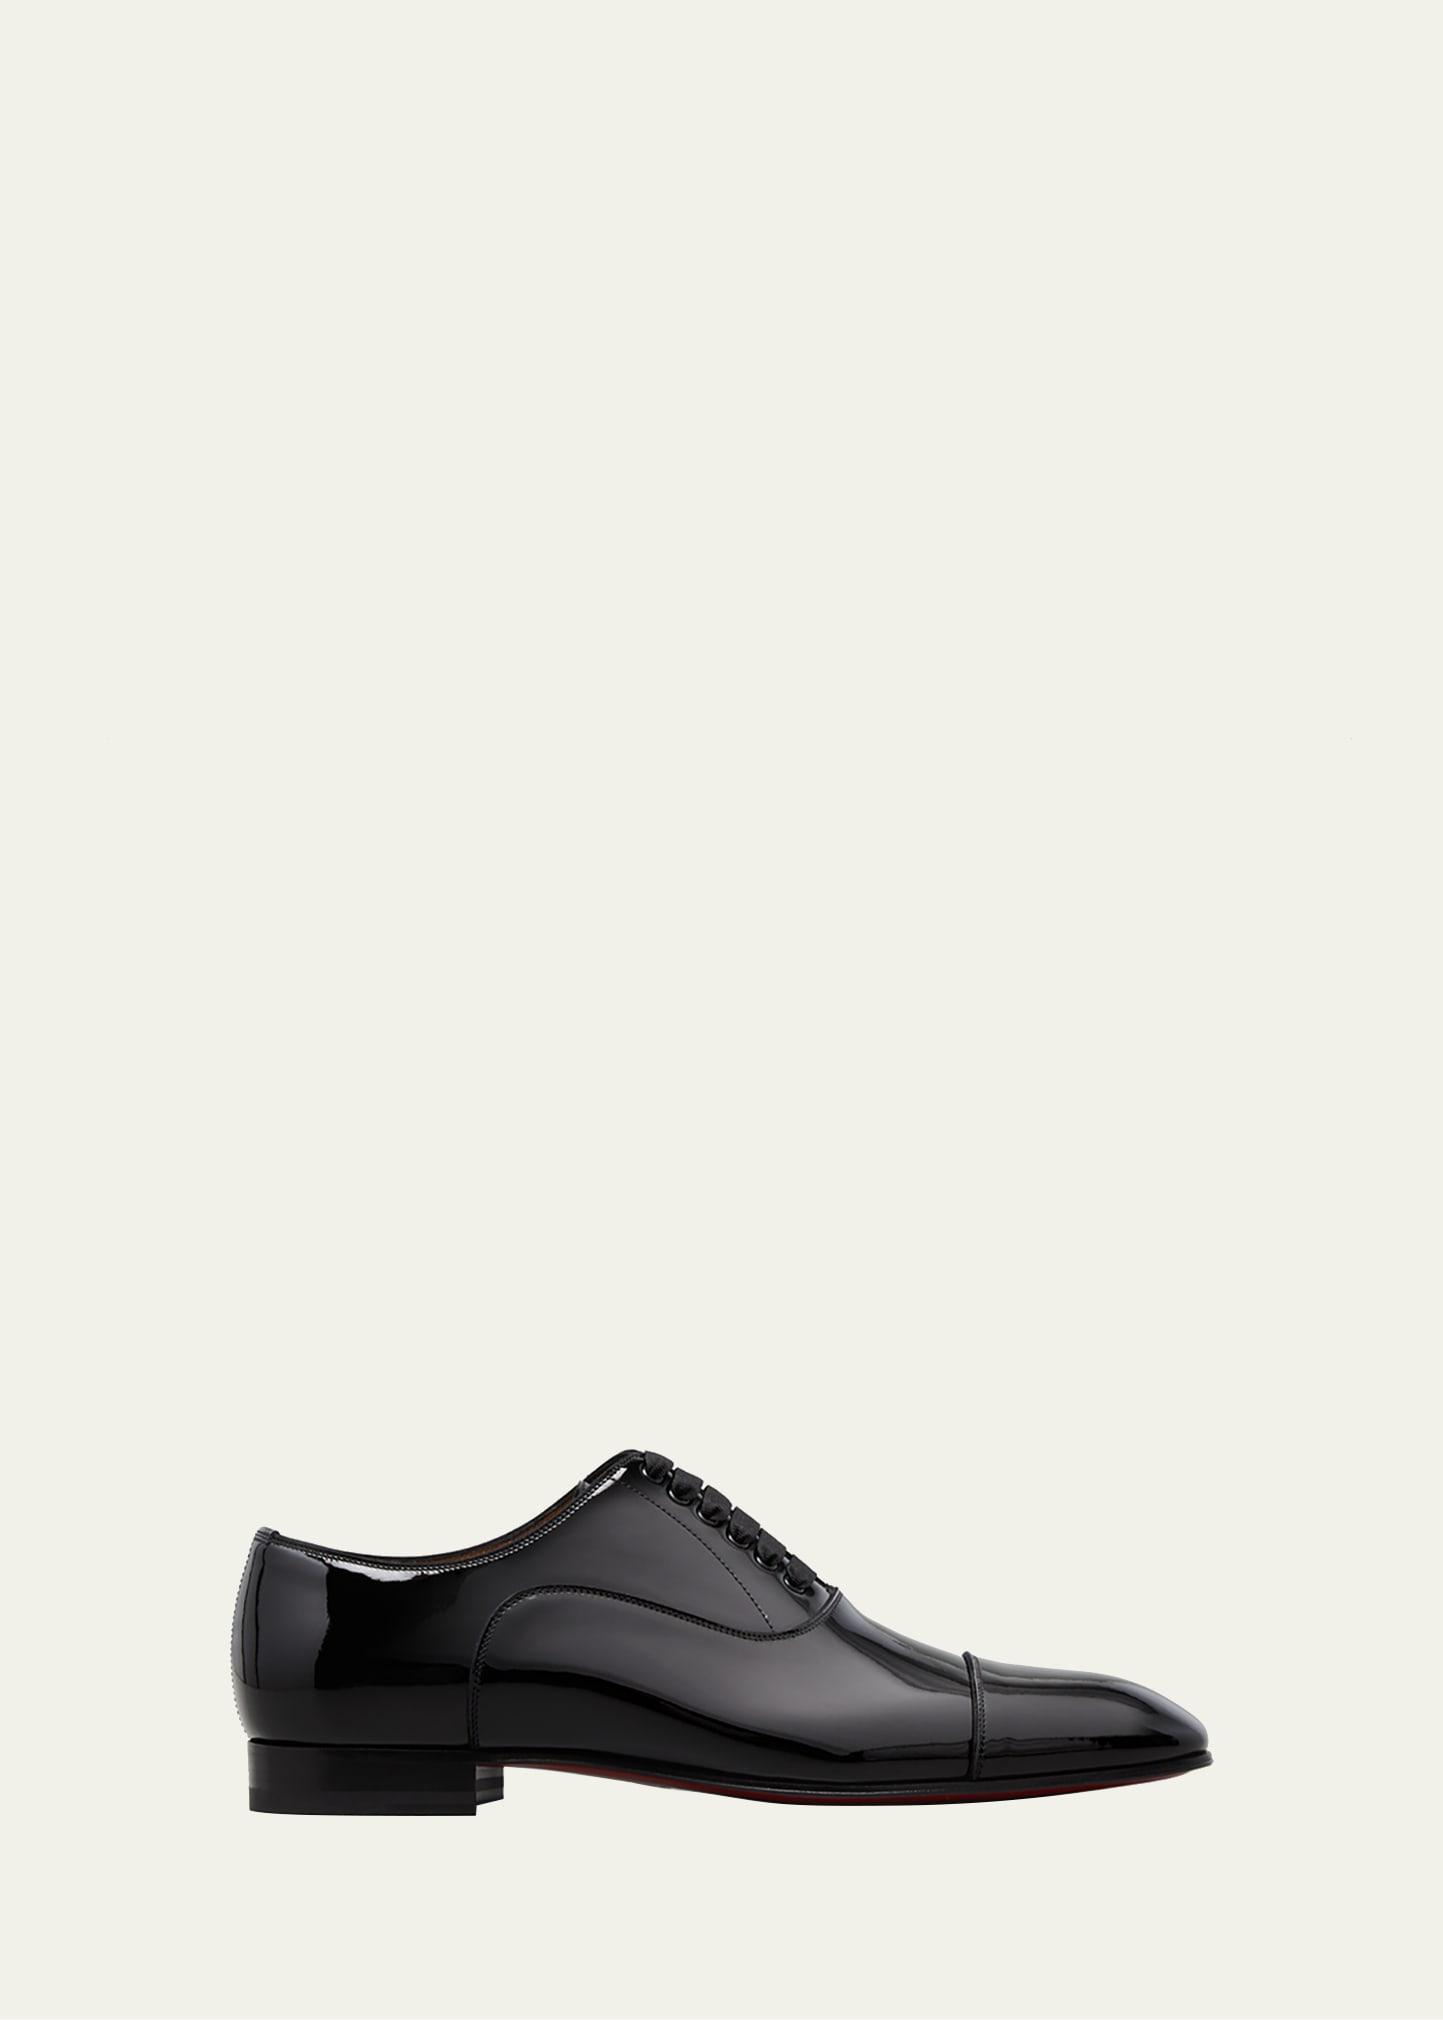 Mens Greggo Patent Leather Oxford Shoes Product Image